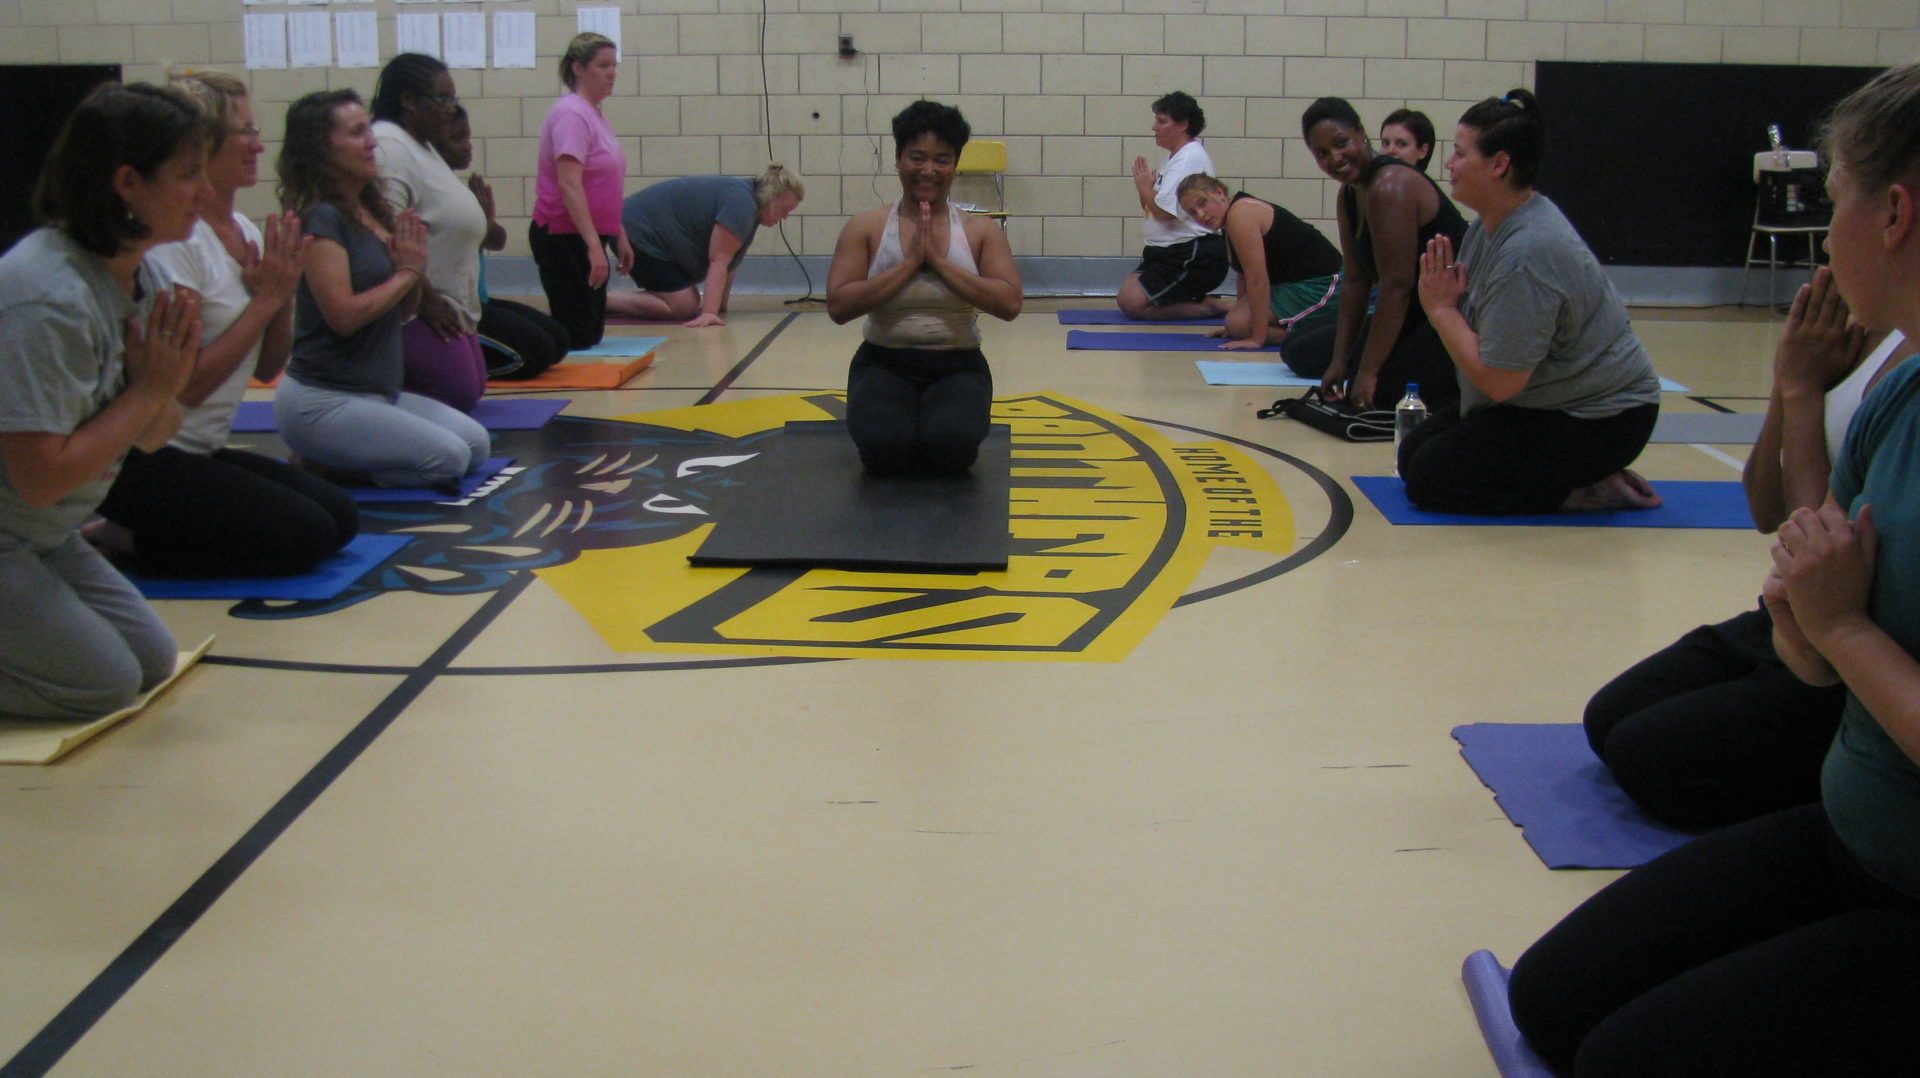 Here I am teaching the first Just B Yoga classes in 2010 at the Shabazz Academy.